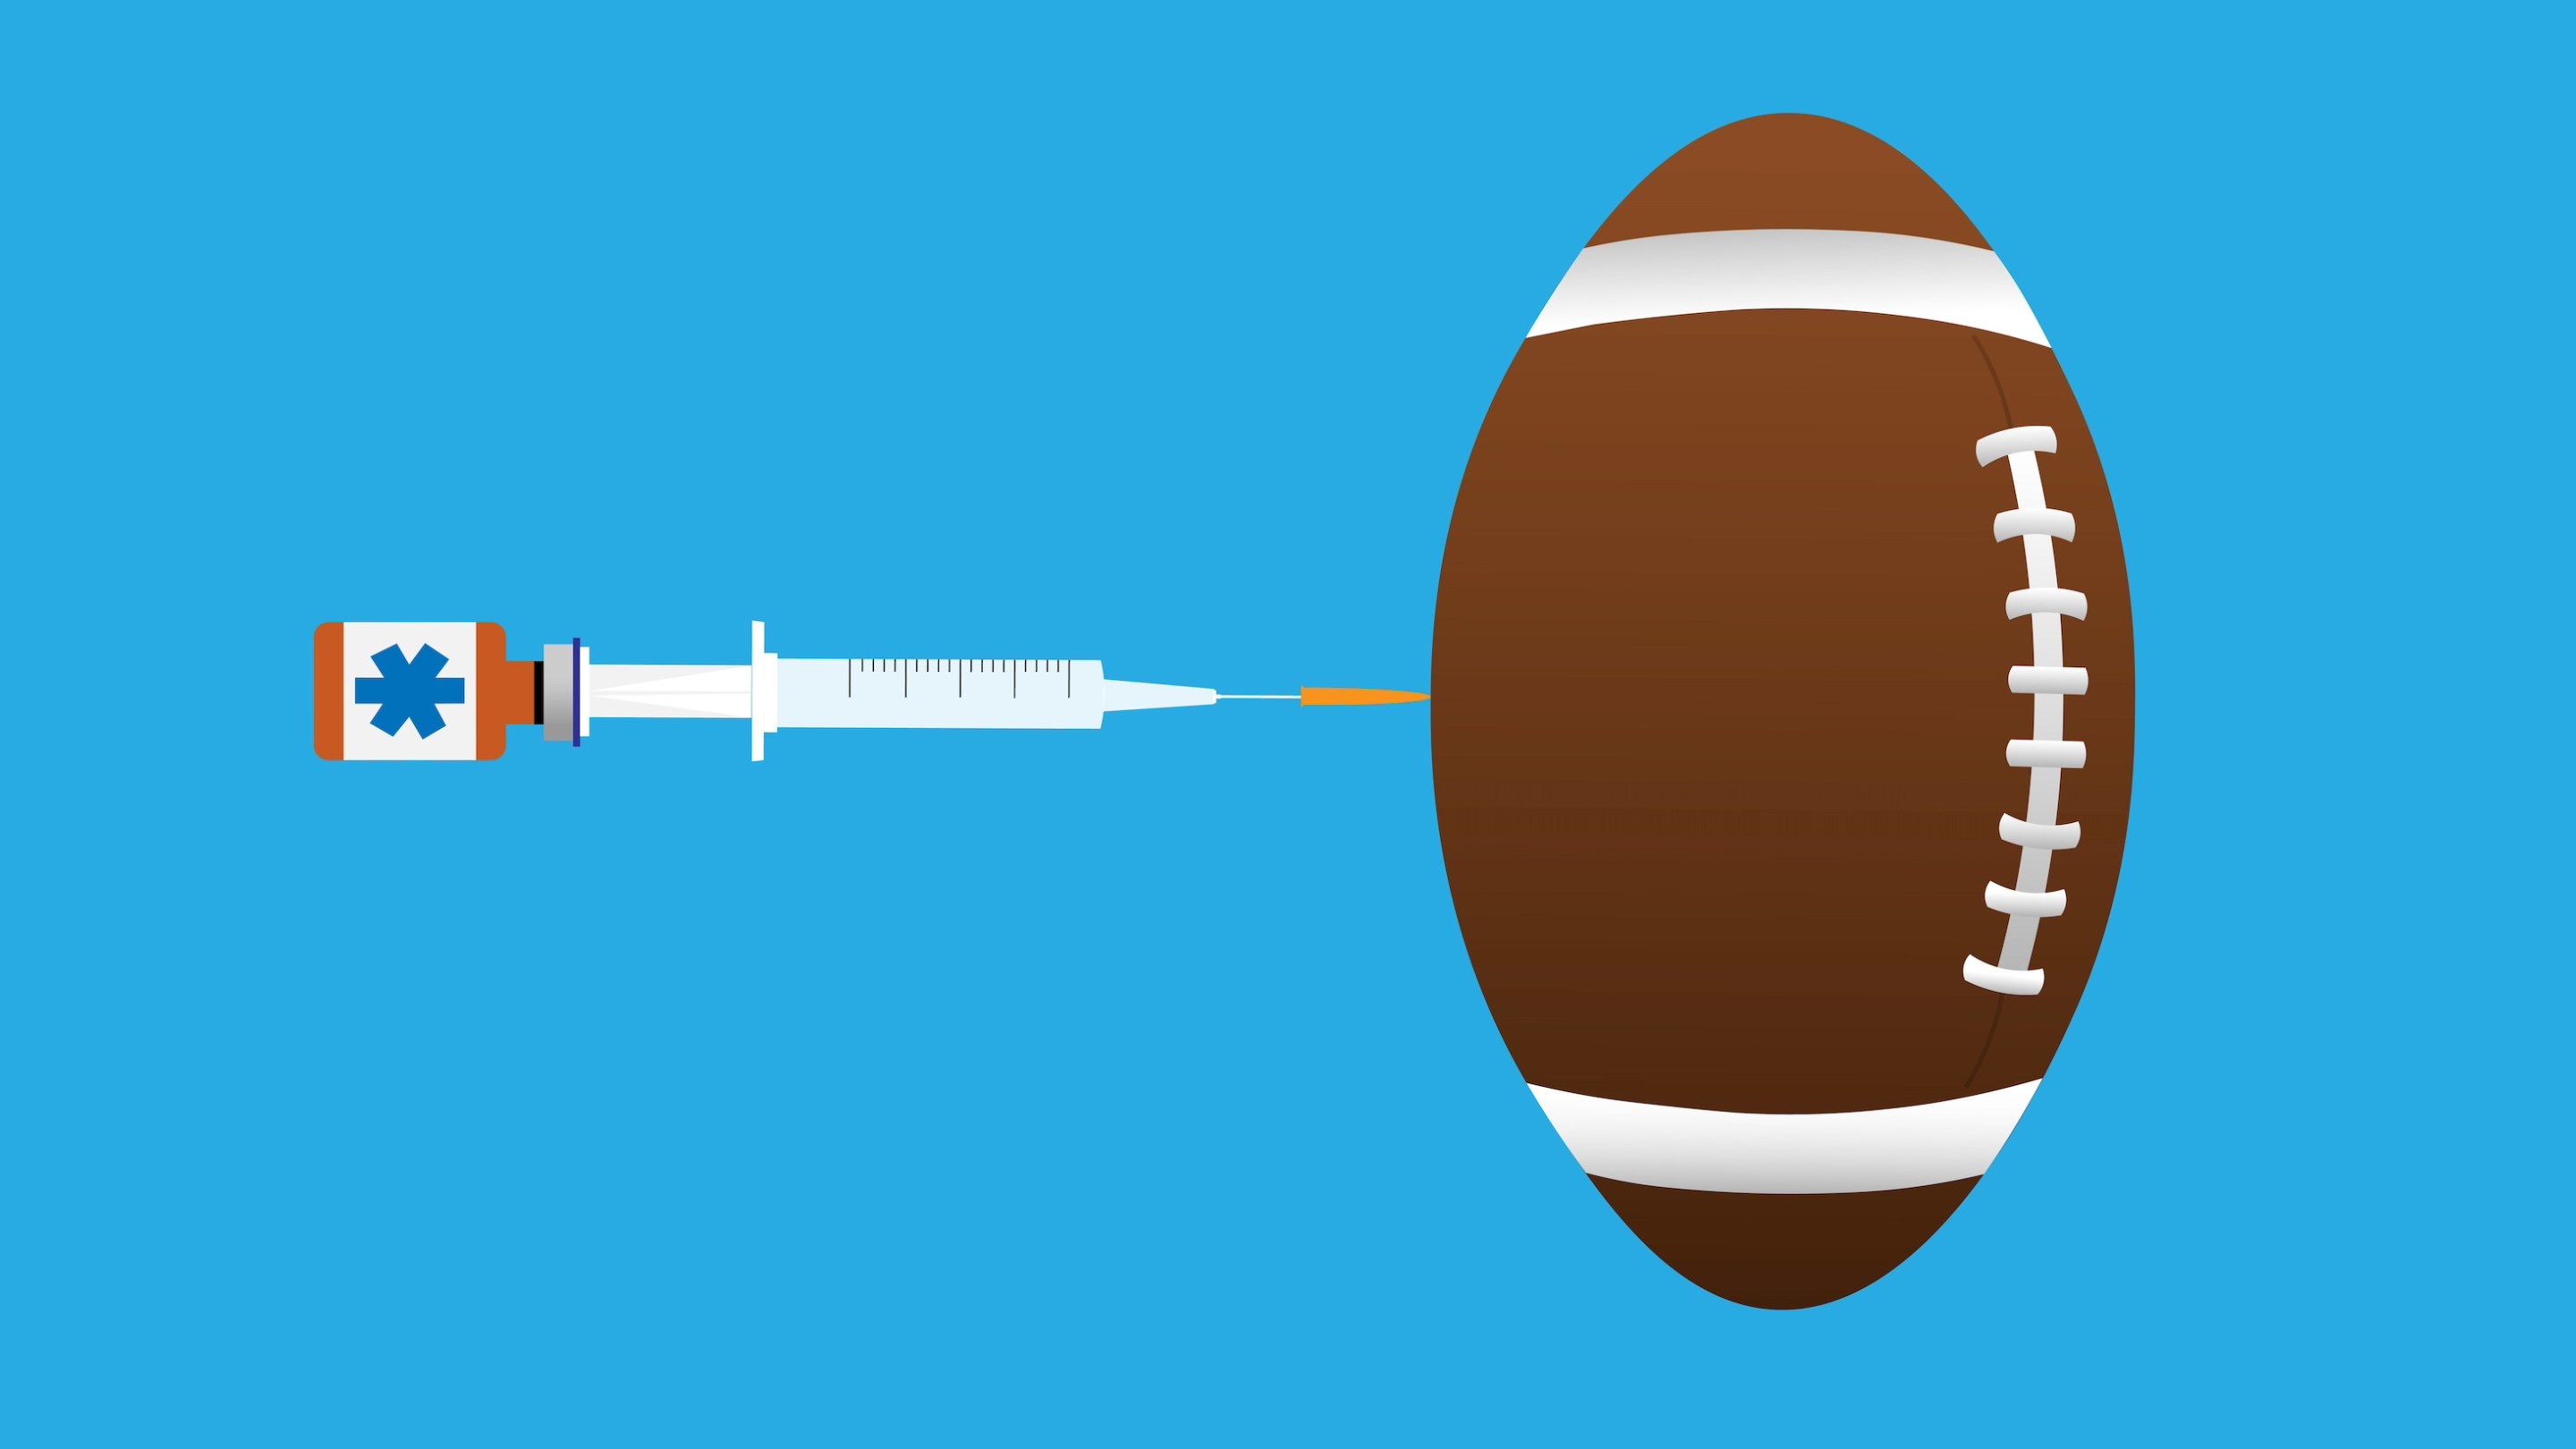 A football is being balanced on top of a syringe and vaccine vial.